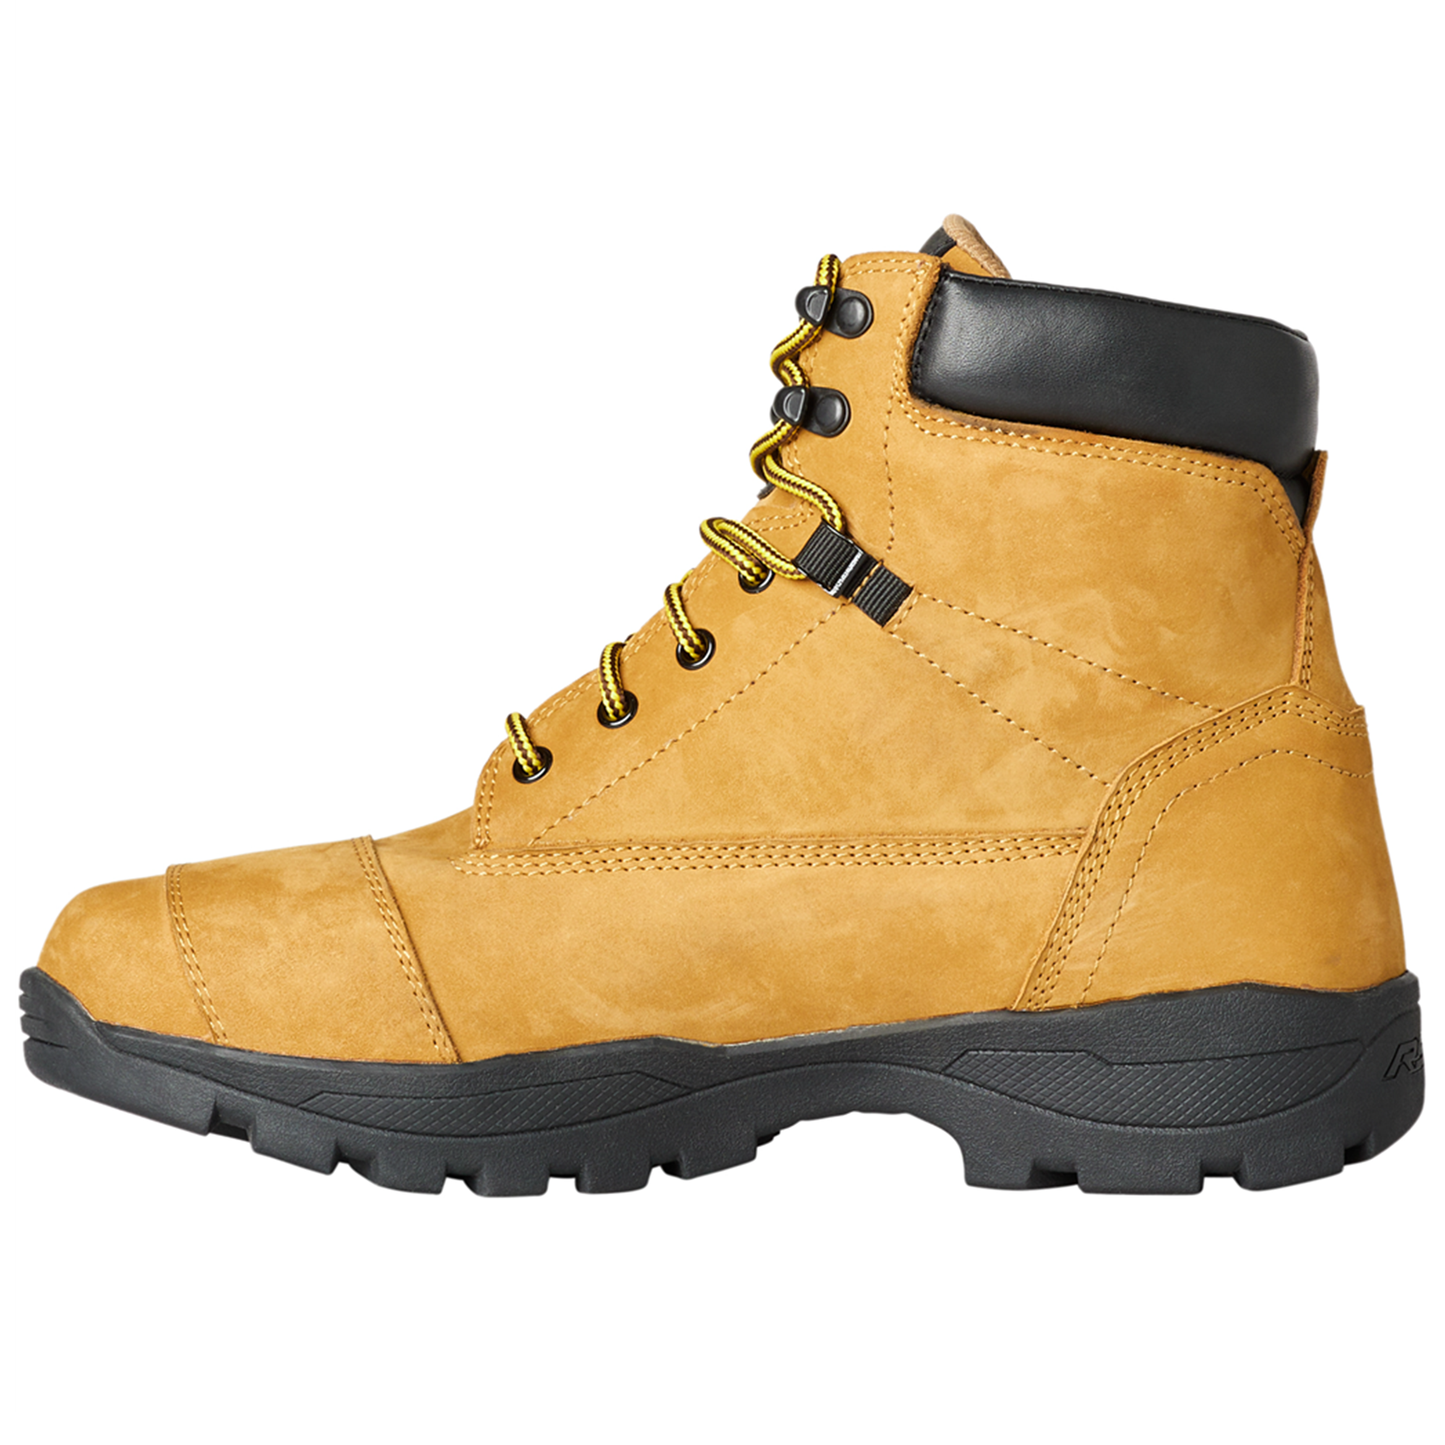 RST Workwear Men's Boots - Sand